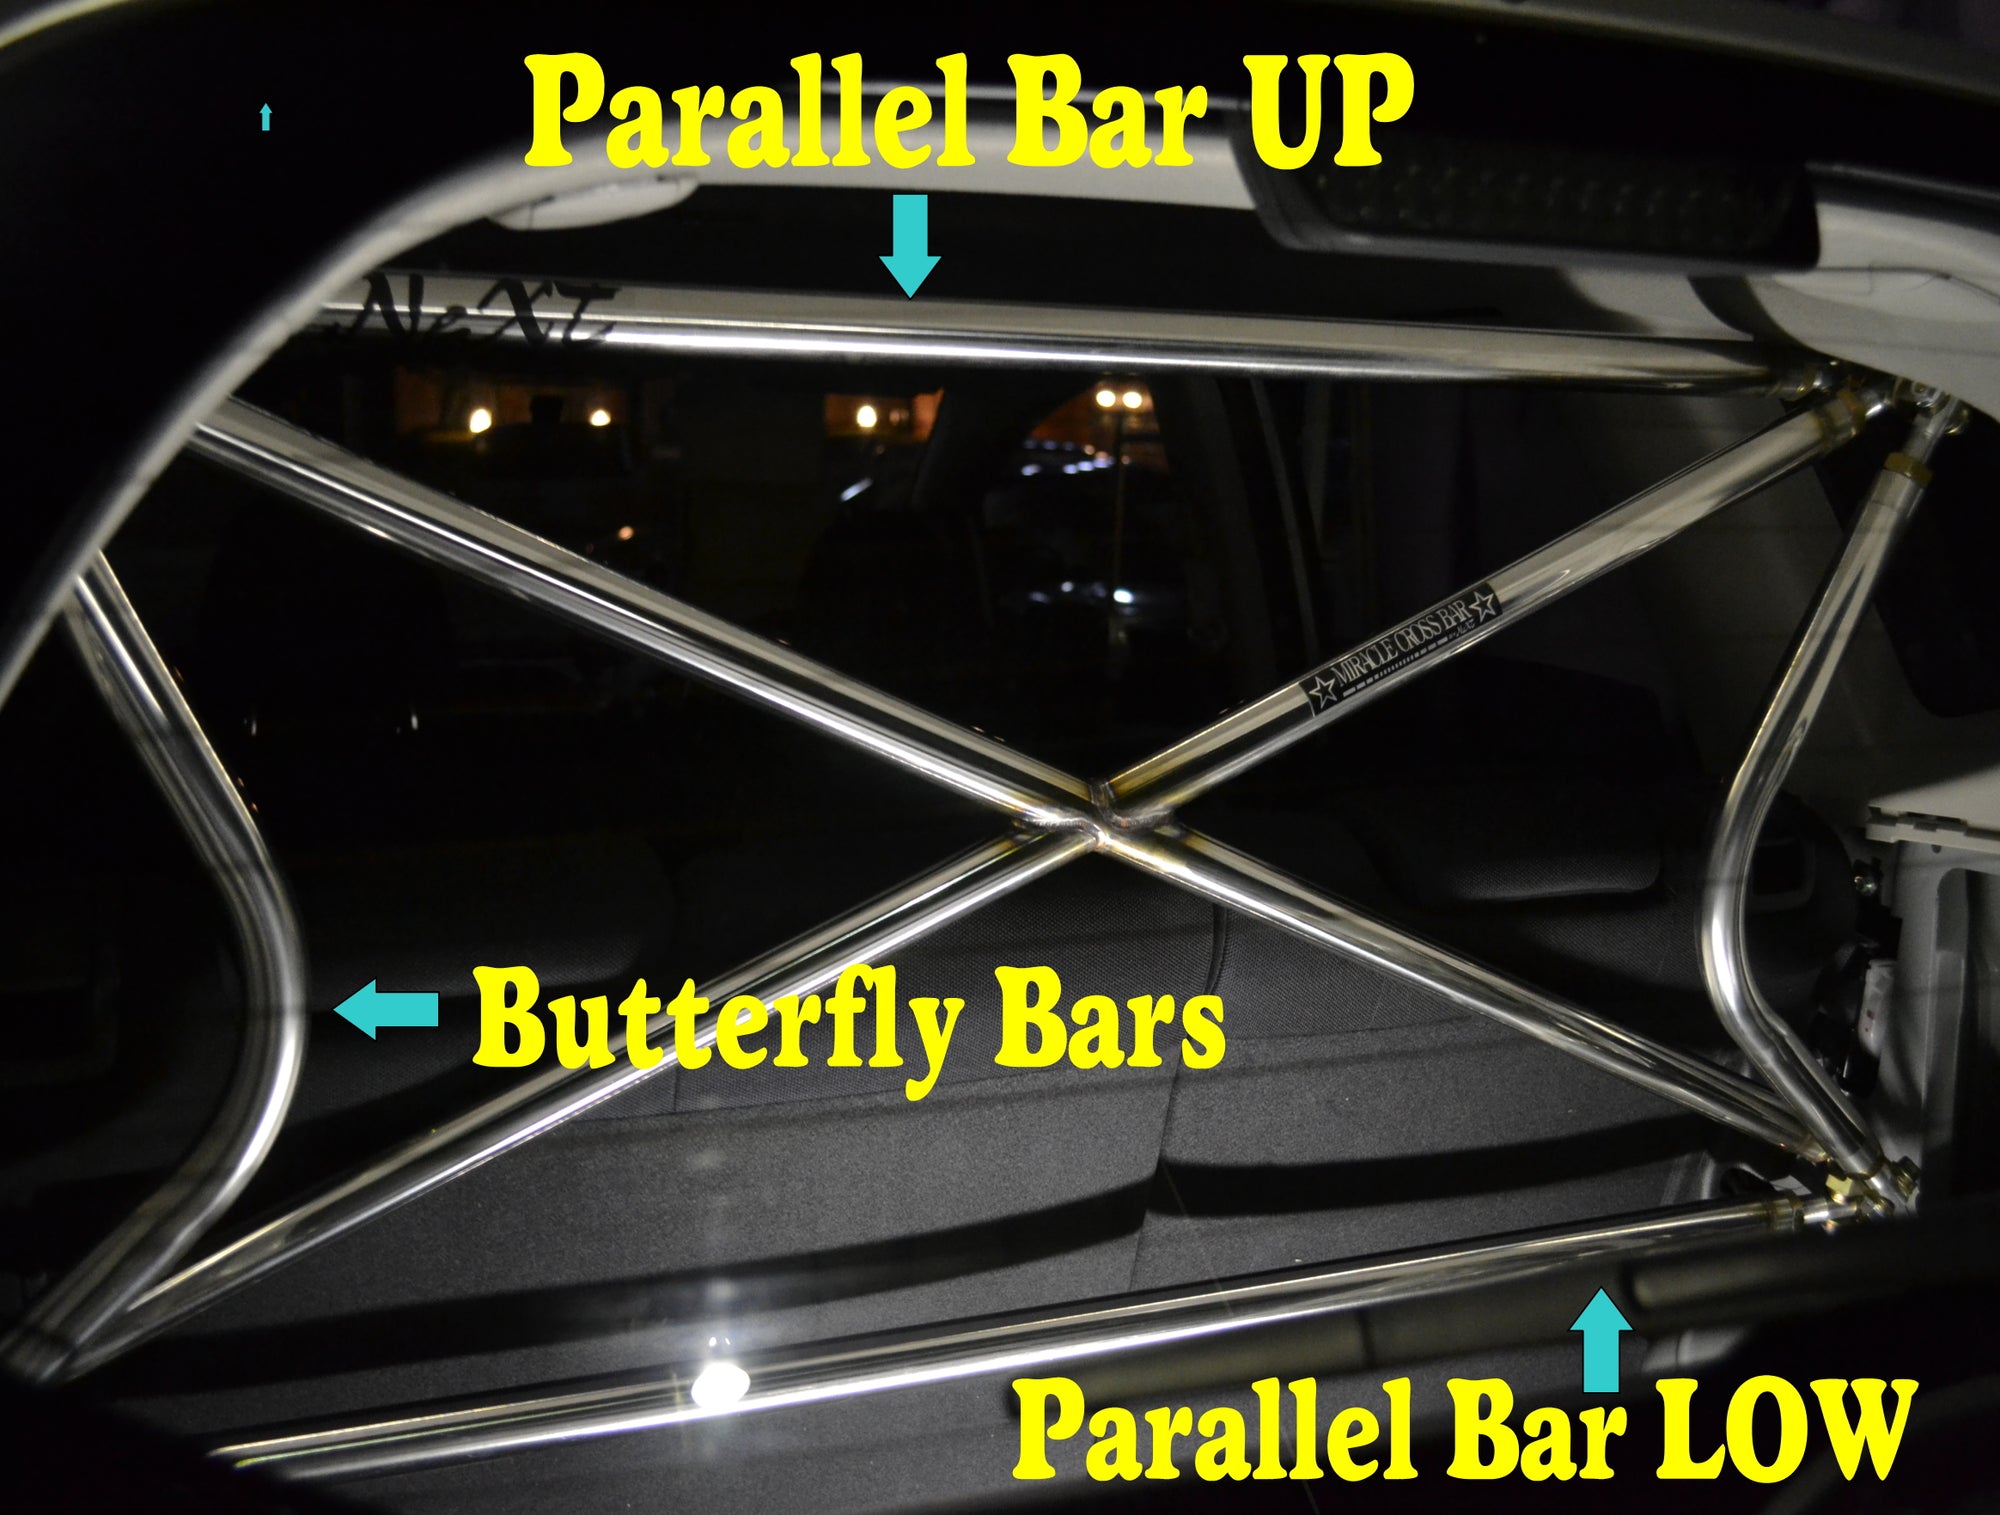 NEXT MIRACLE CROSS BAR BUTTERFLY BAR RIGHT & LEFT STAINLESS 32 FOR SUZUKI ALTO HA36 NEXT-01397